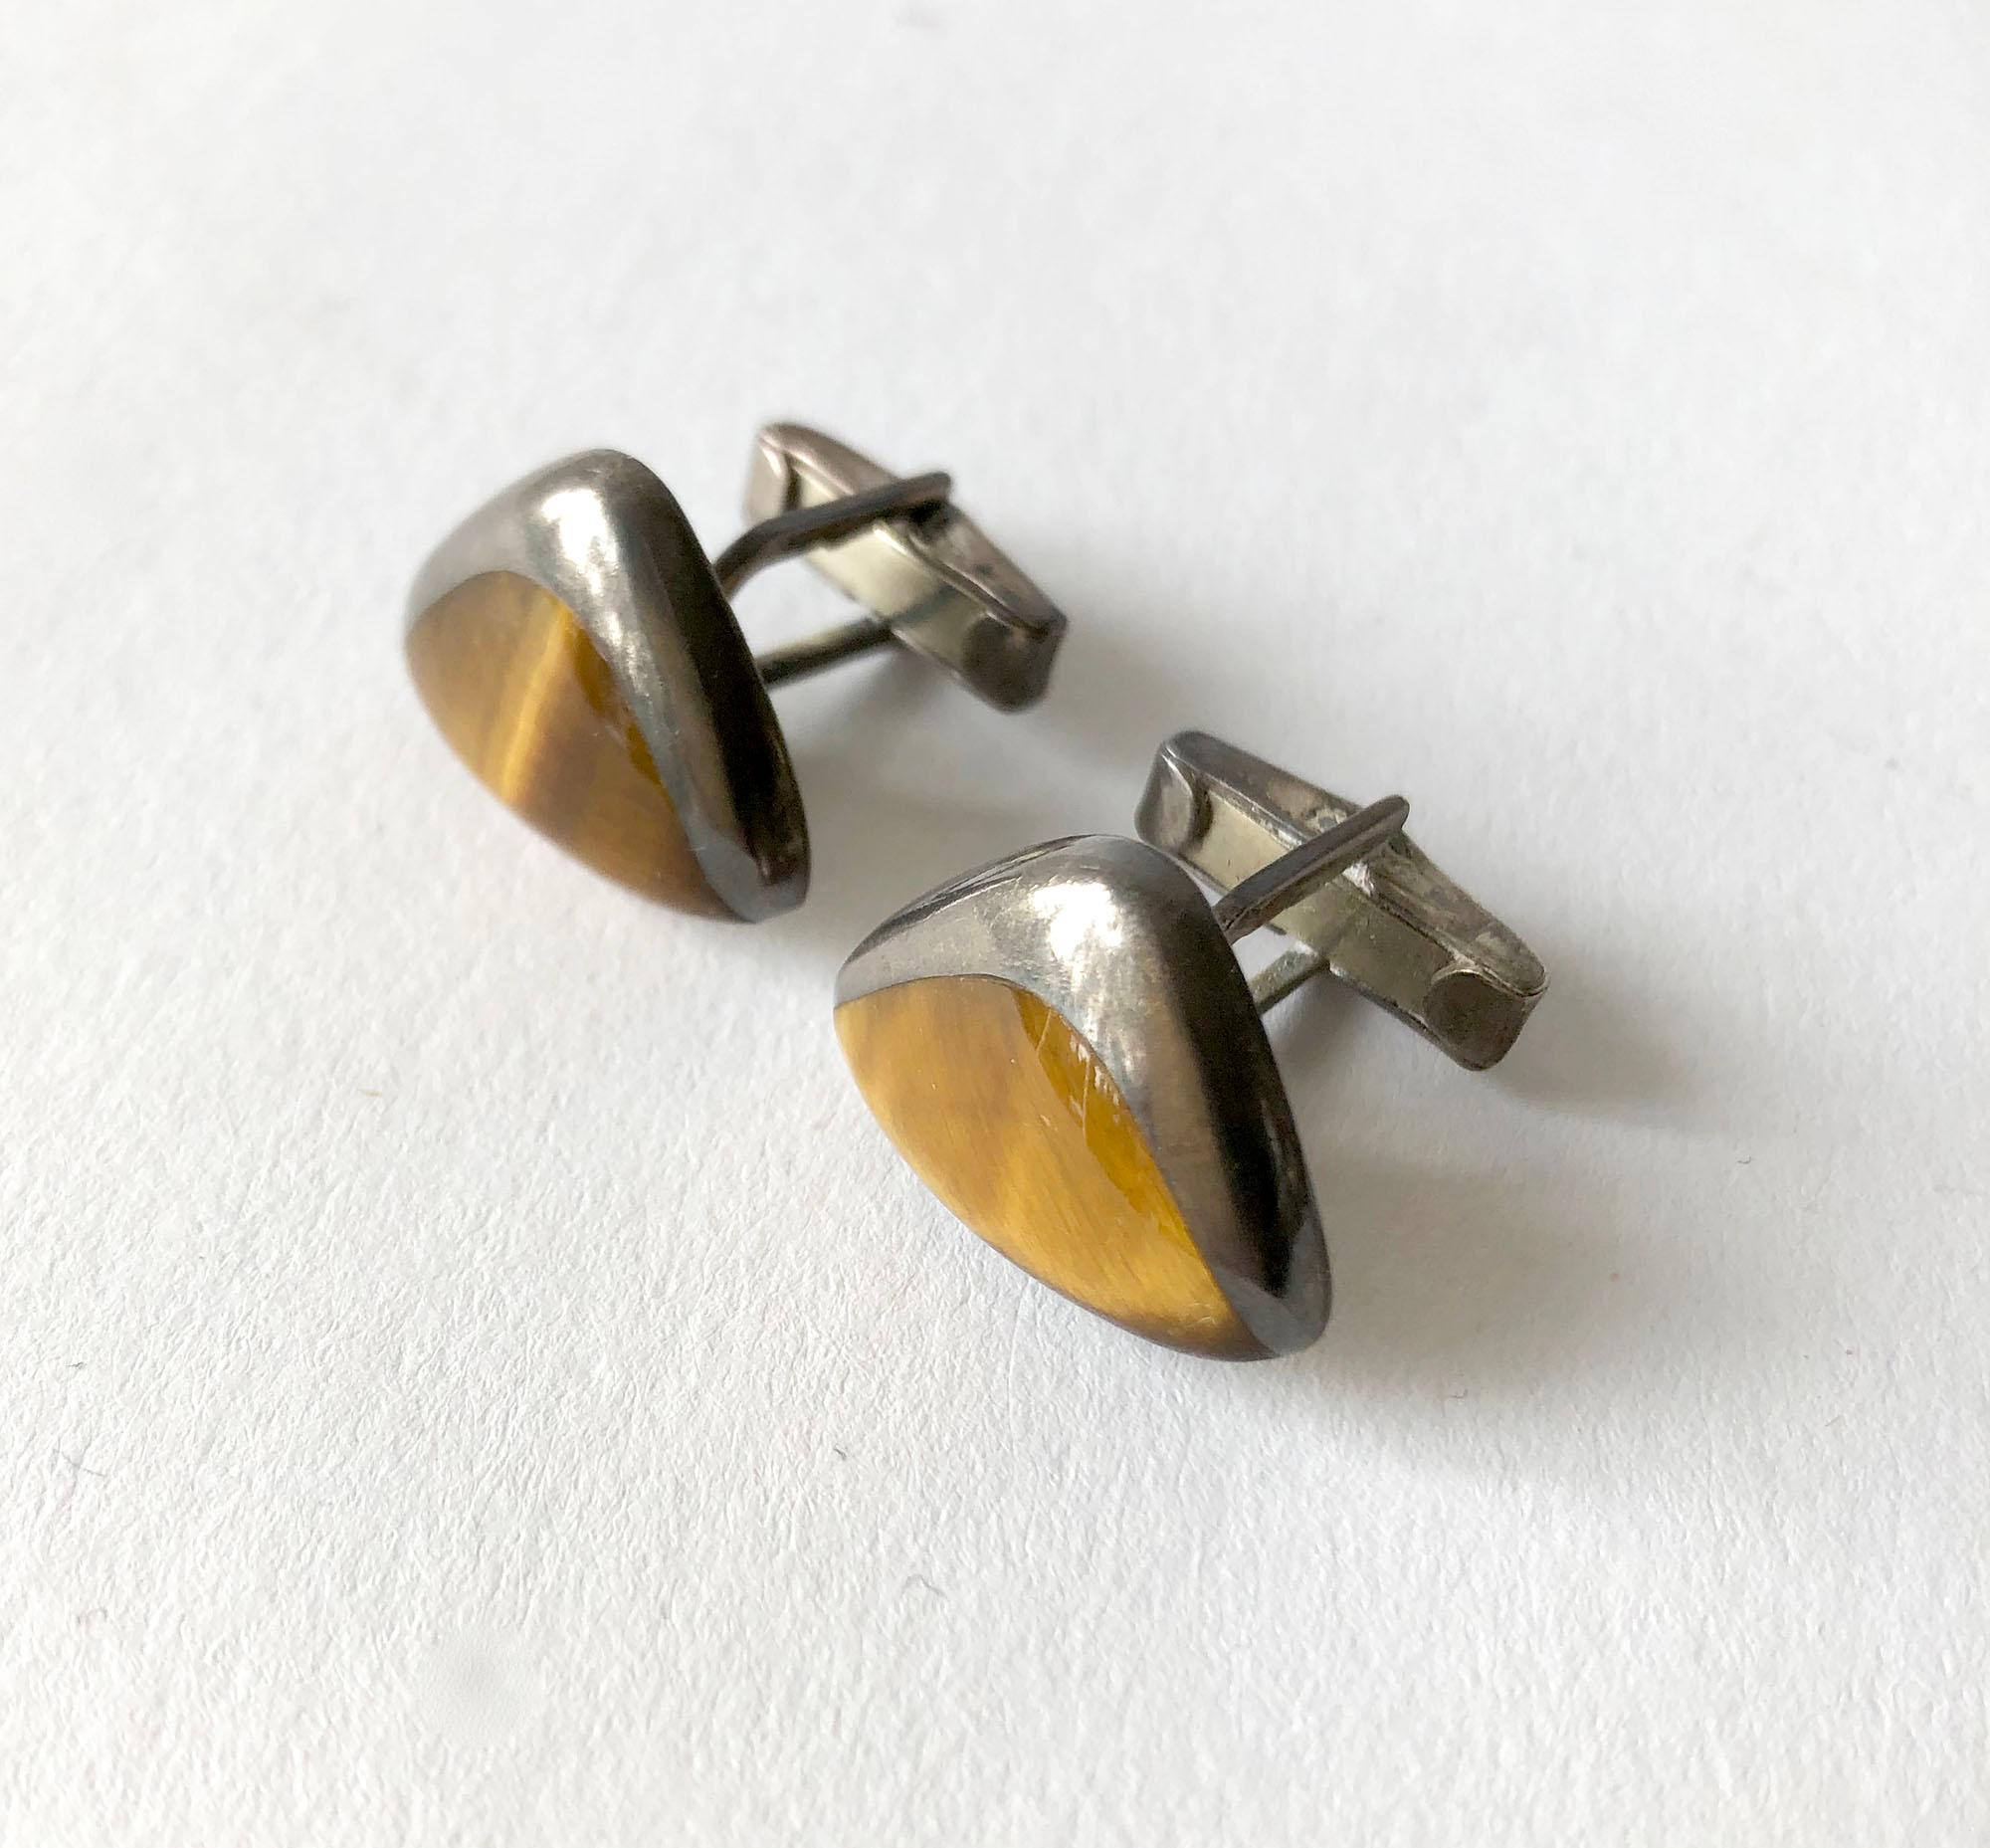 Darkened sterling silver and tiger's eye modernist cufflinks created by Enrique Ledesma of Taxco, Mexico. Cufflinks measure 7/8